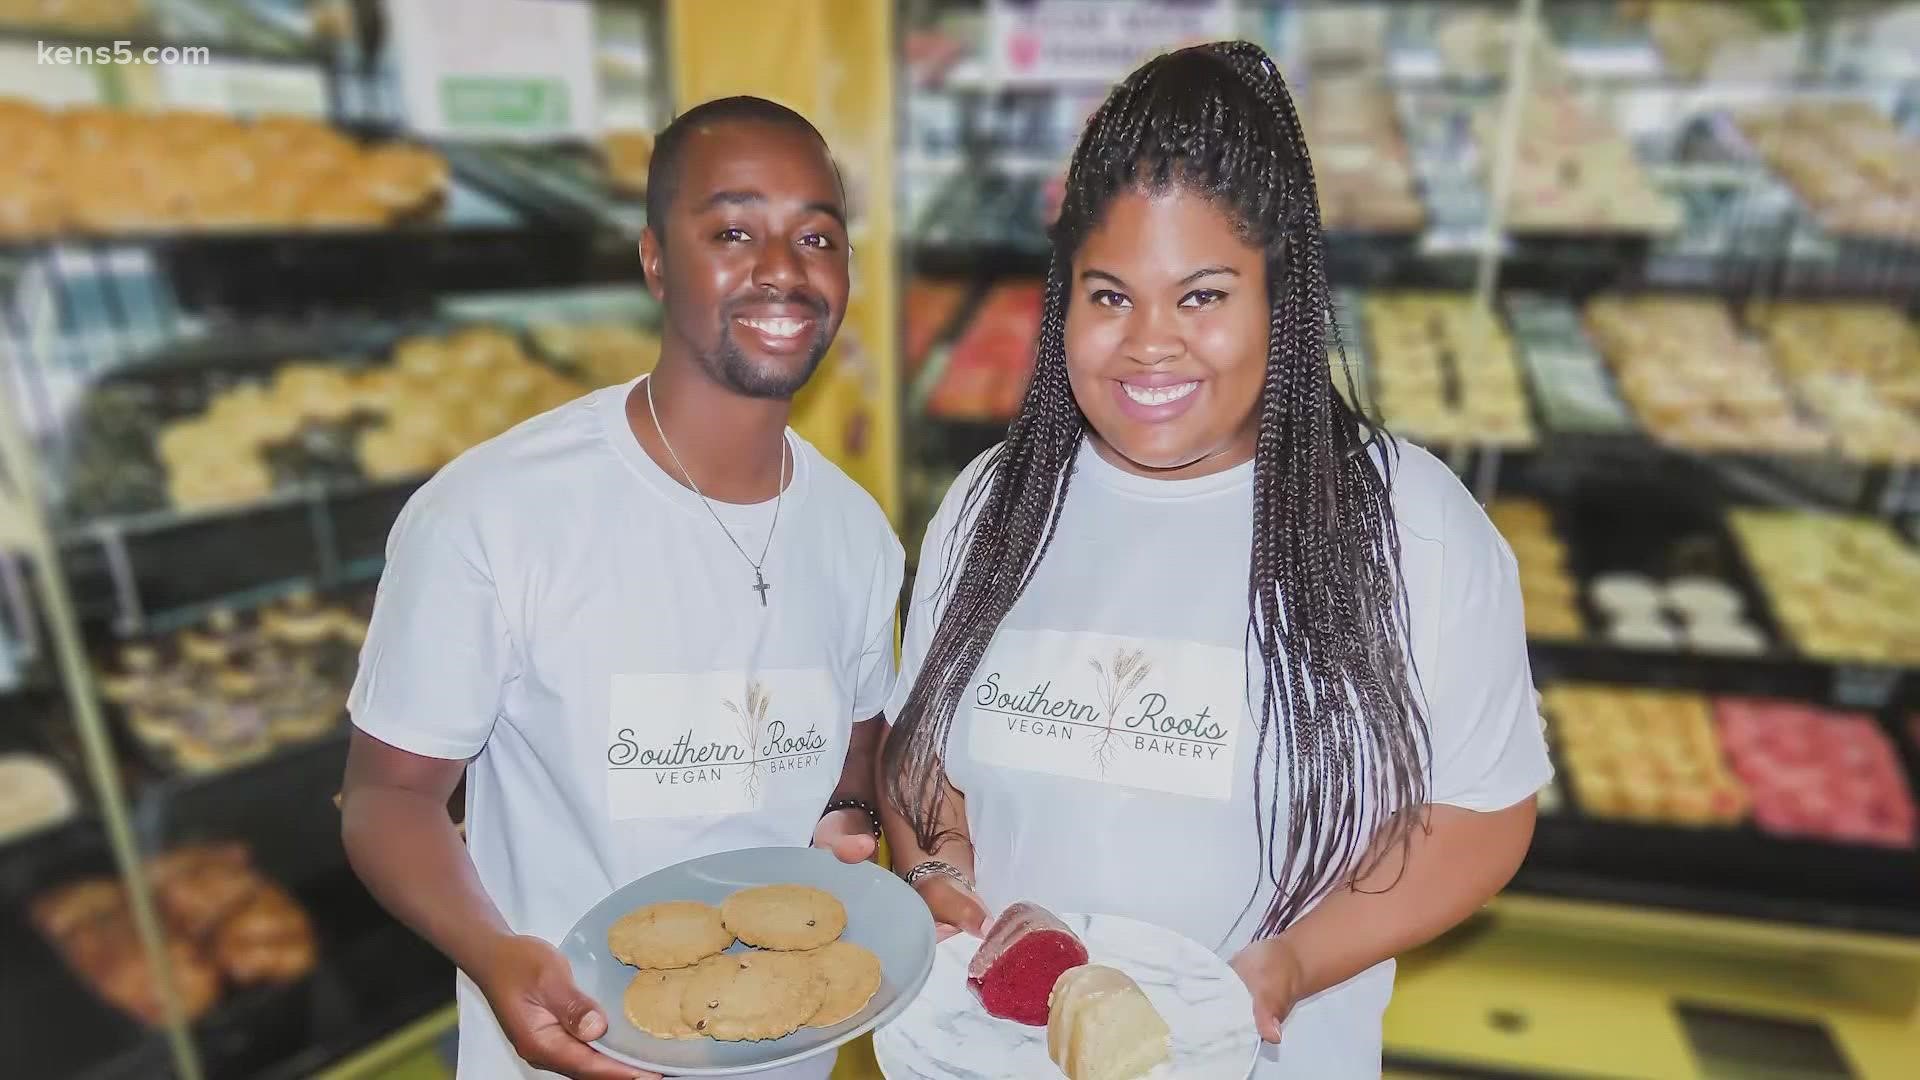 A couple looking to get healthy went vegan, but didn't leave their southern roots behind.